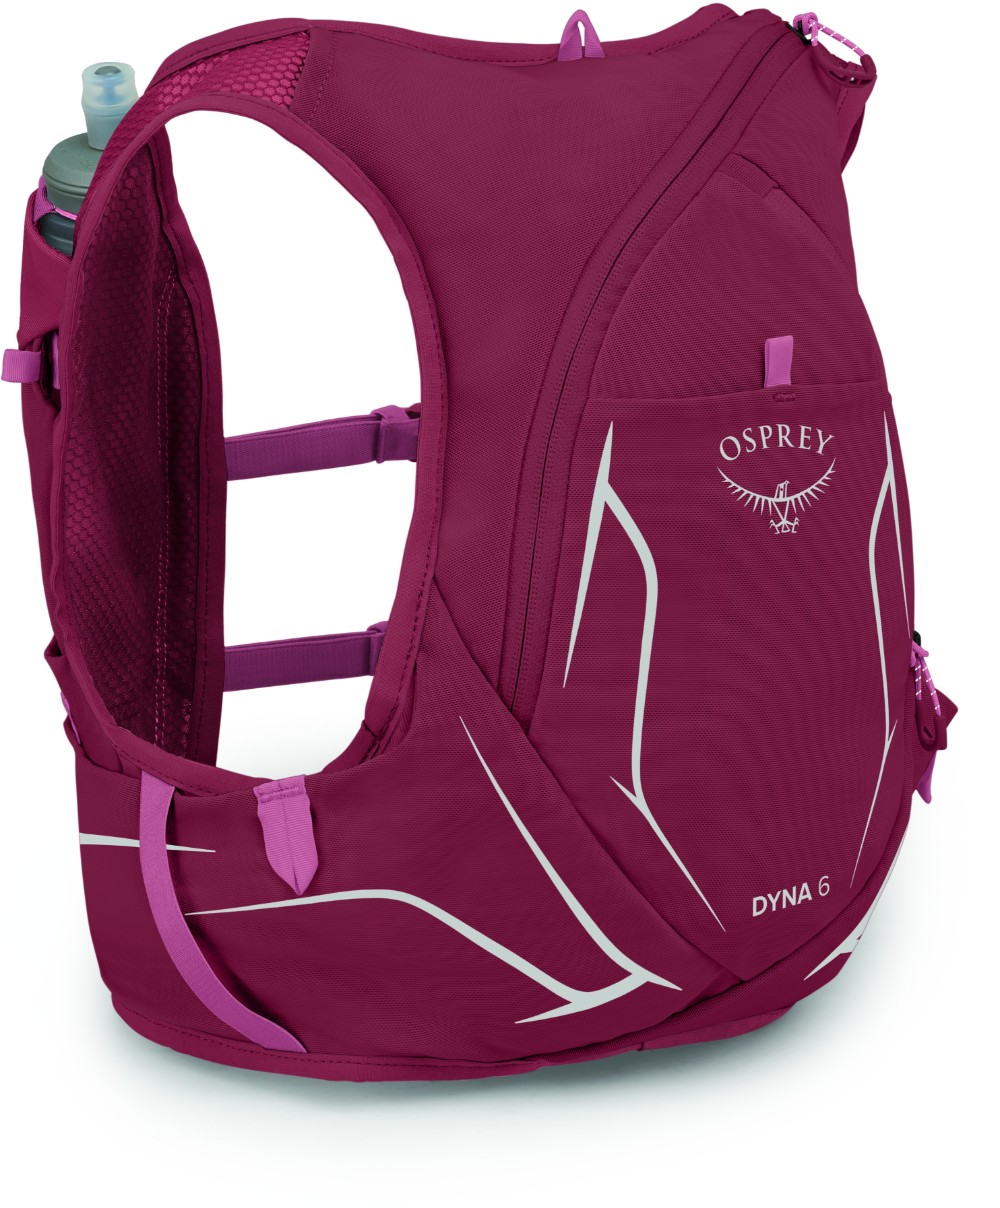 Dyna 6 Womens Hydration Pack with Flasks image 2